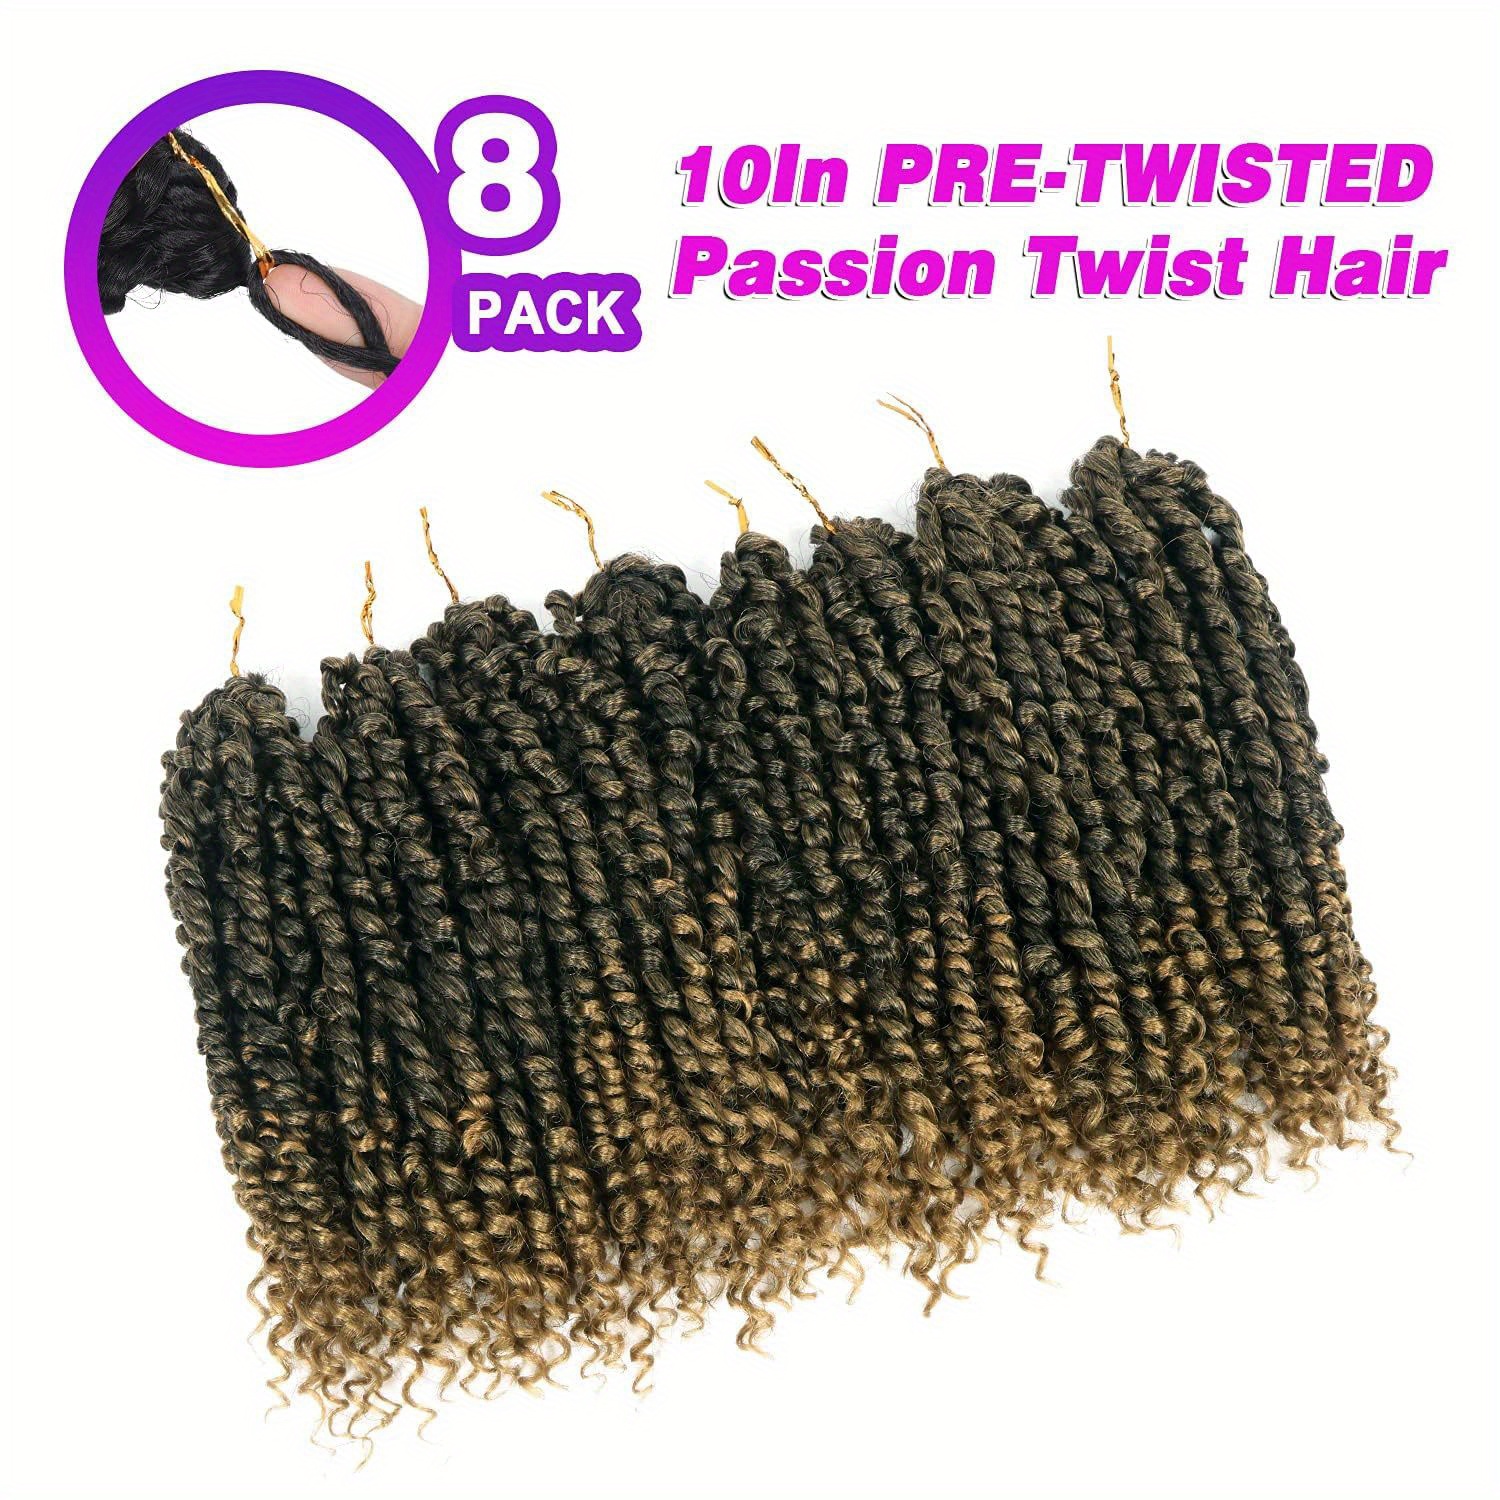  Pre-twisted Passion Twist Crochet Hair 10 Inch 8